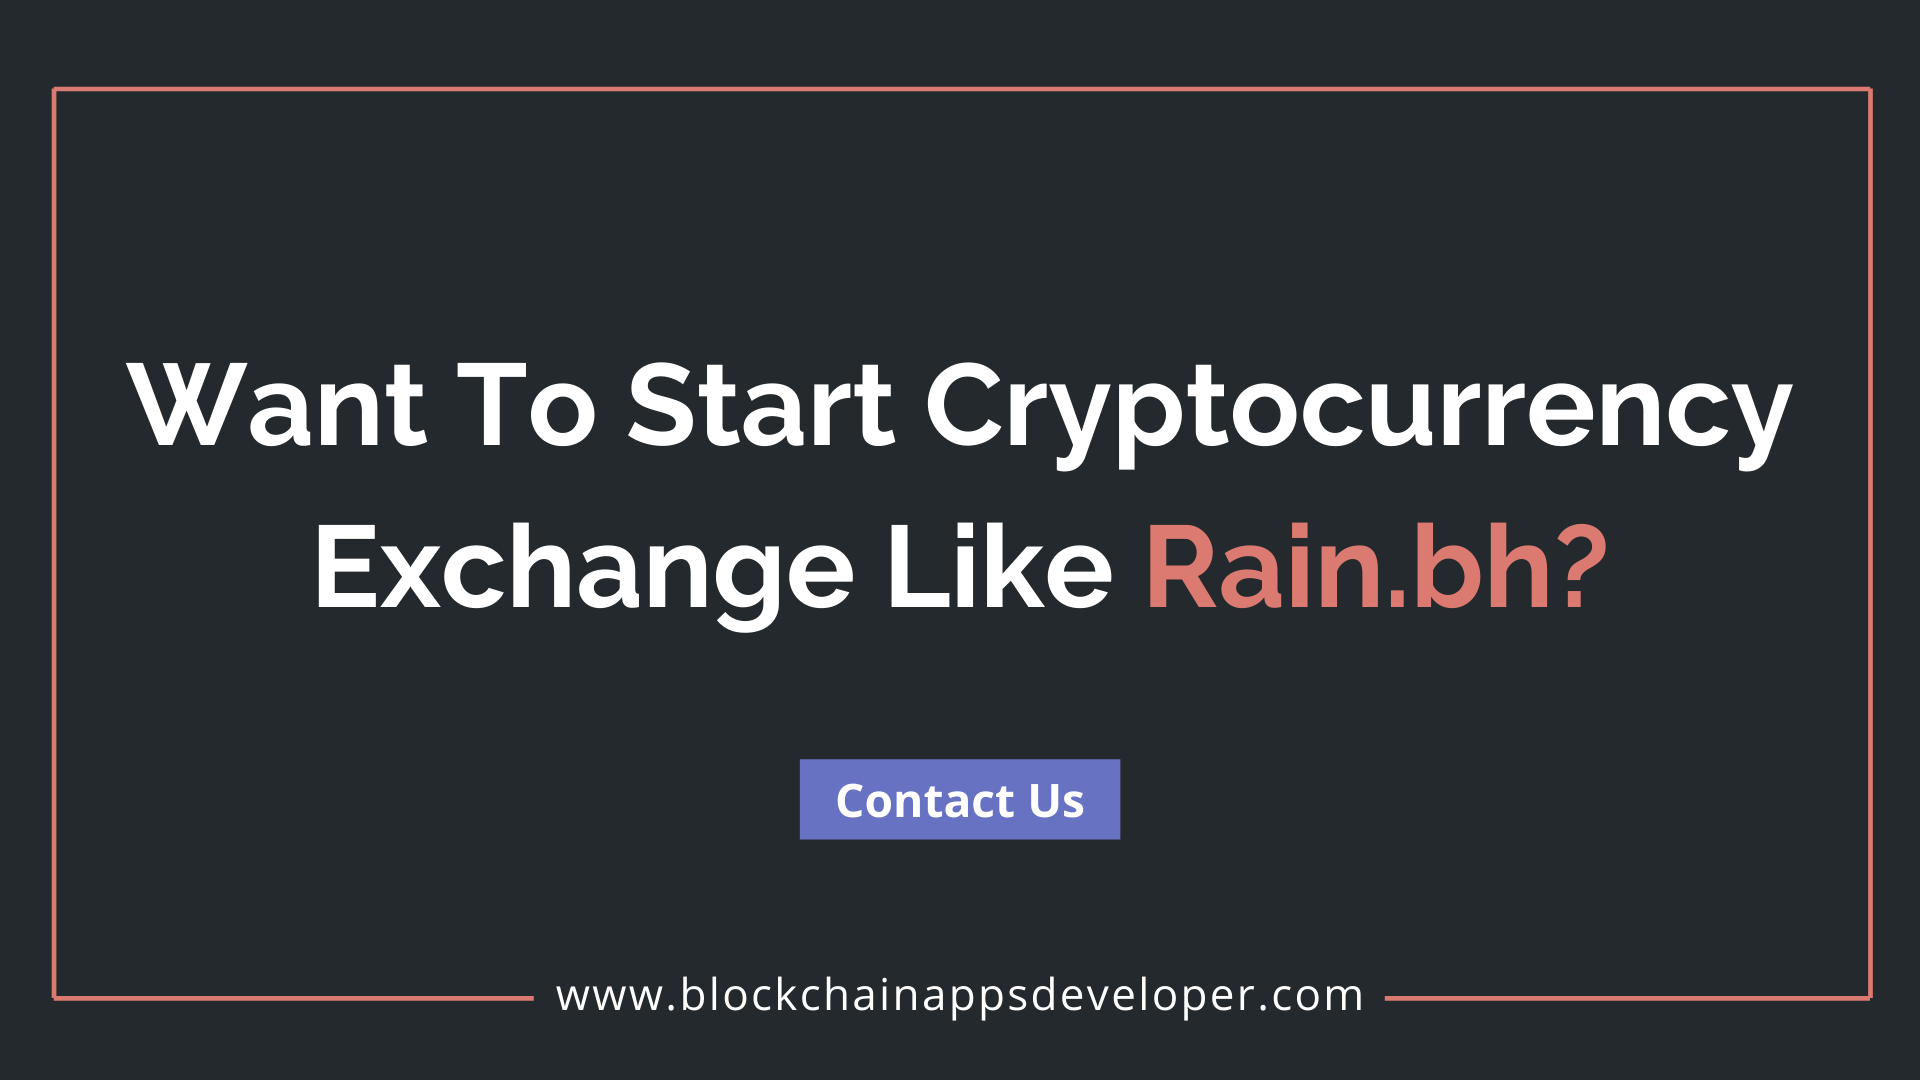 How To Start A Cryptocurrency Exchange Website Like Rain.bh?